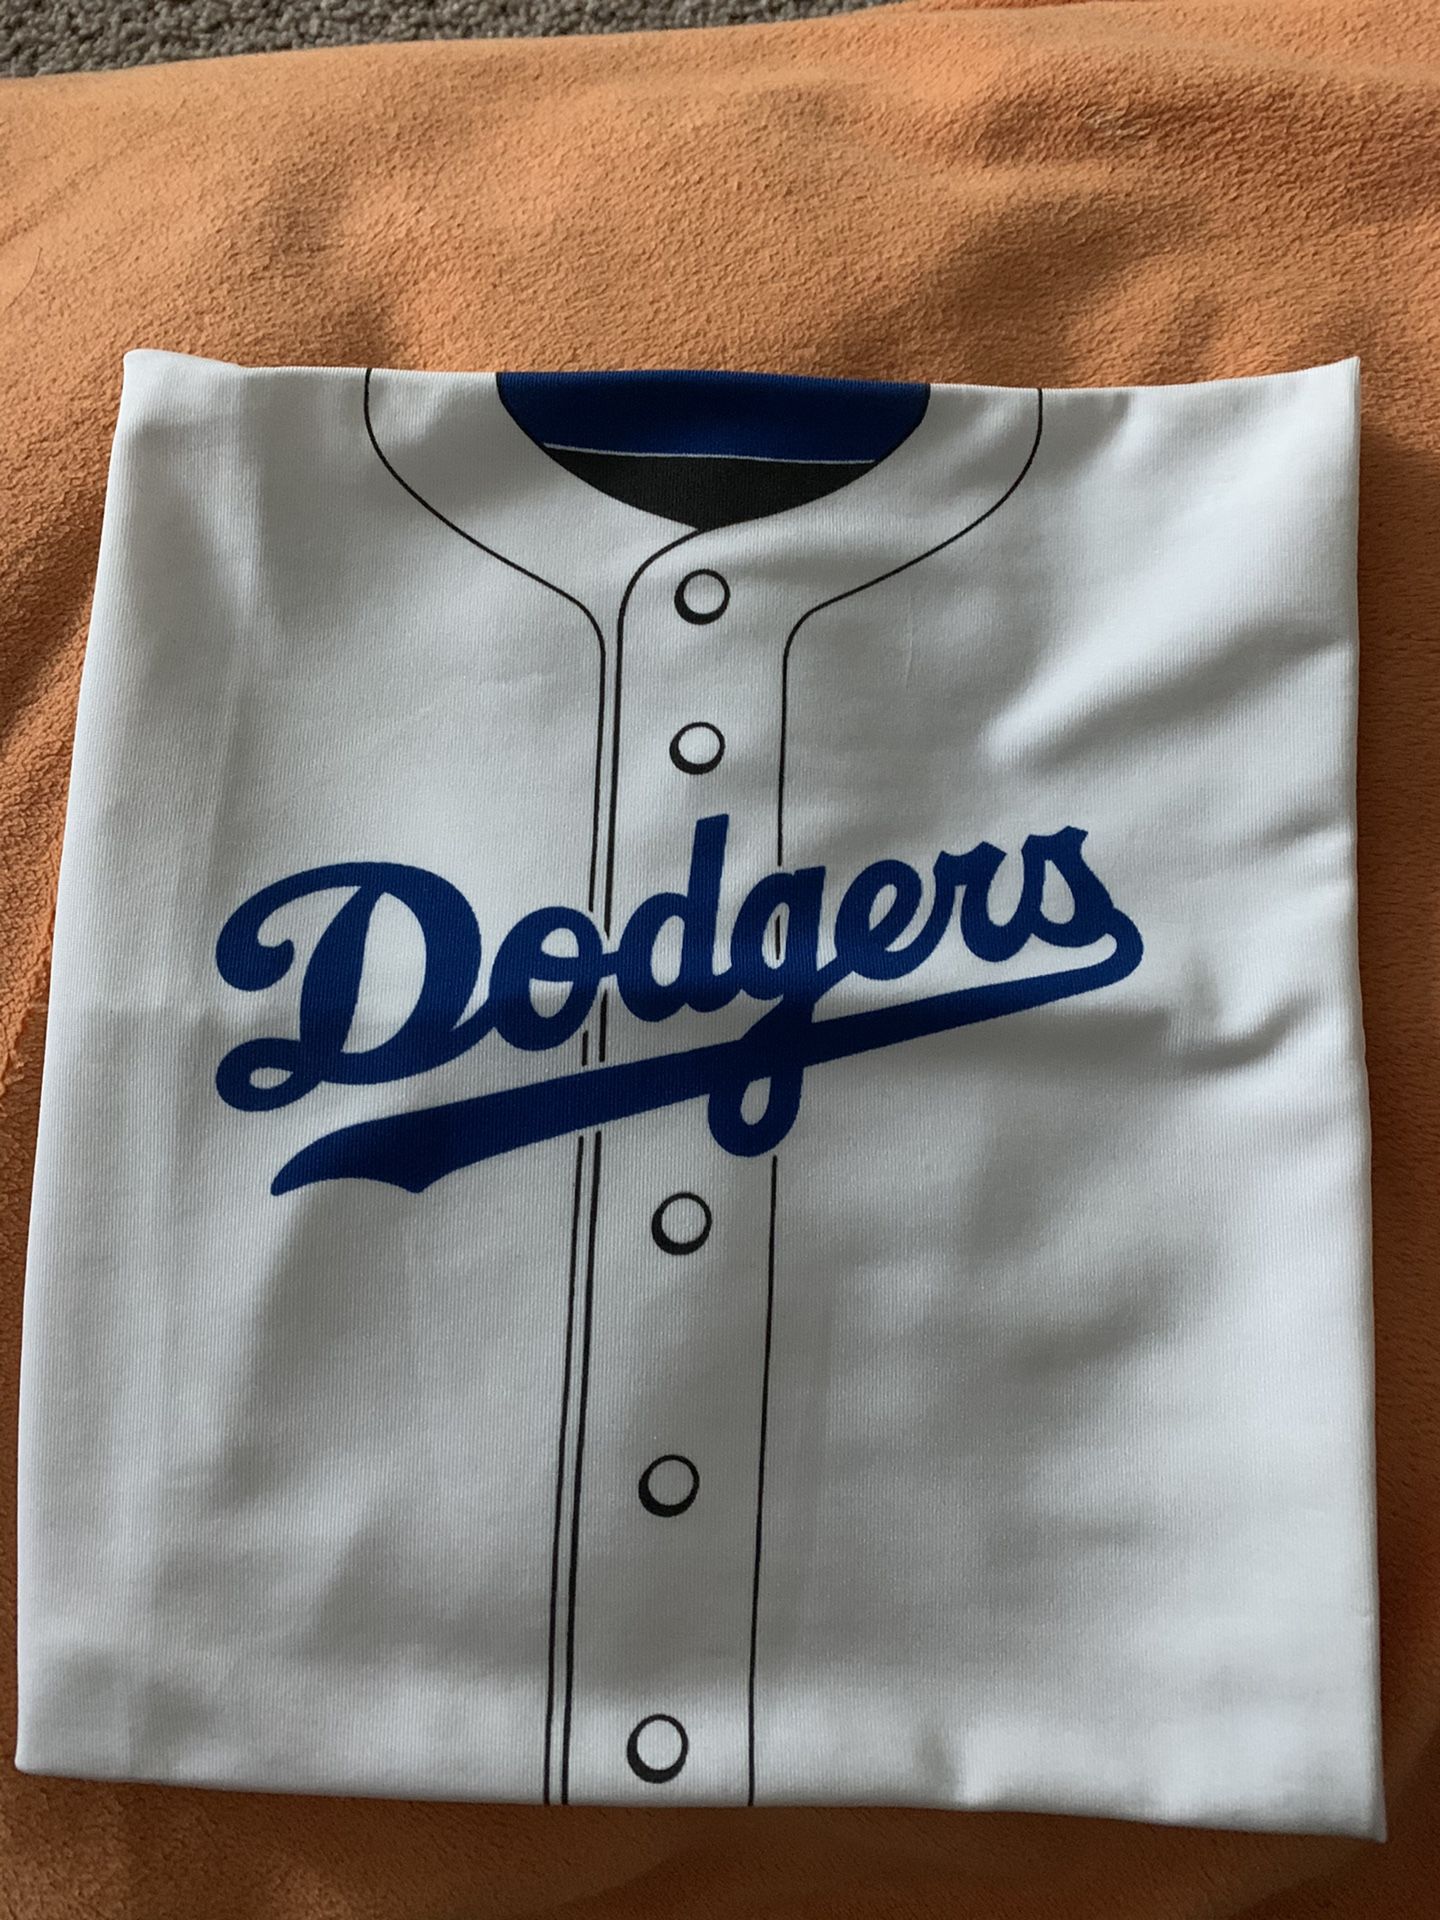 Dodgers book cover